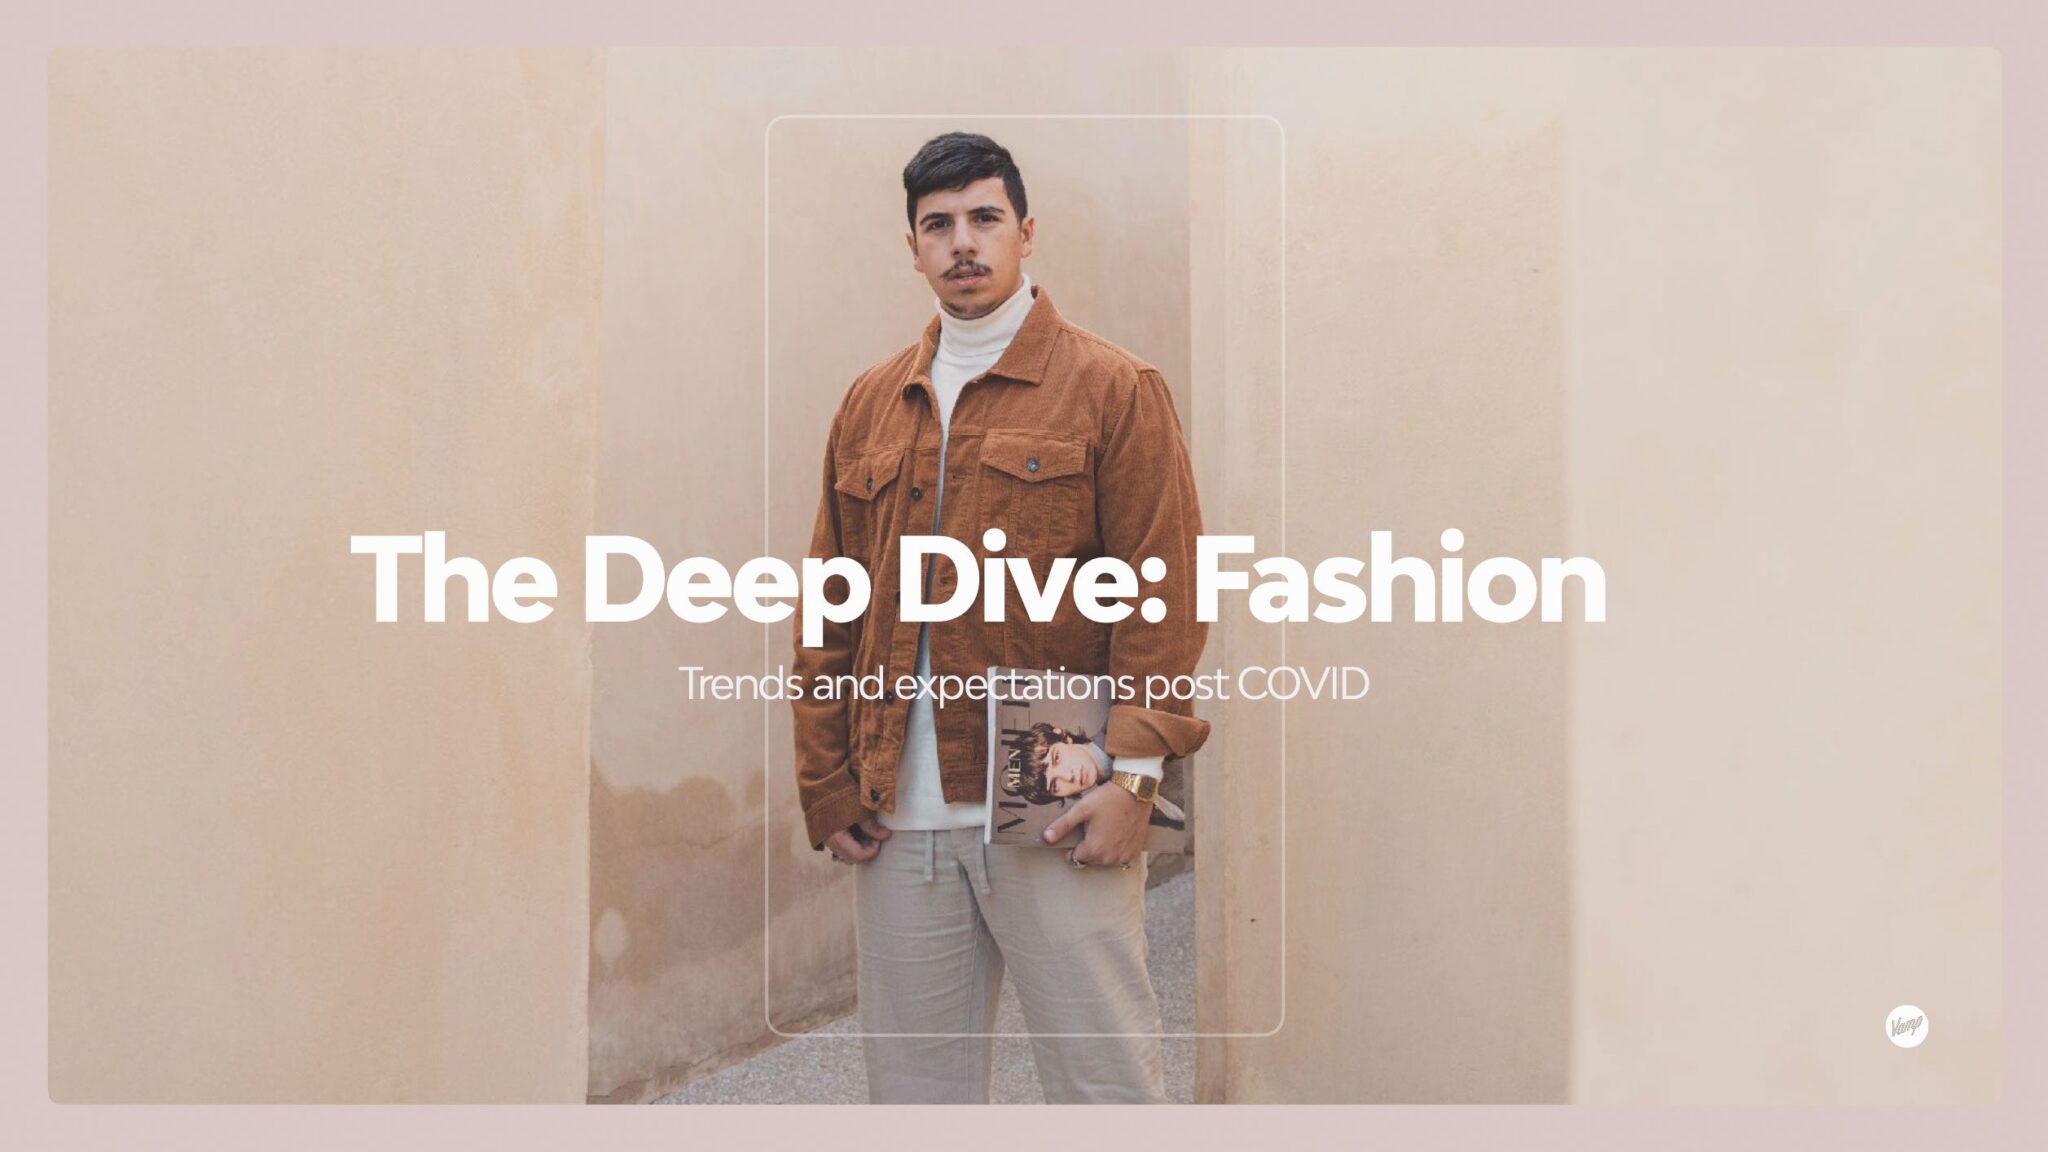 Download Vamp's free Deep Dive report on fashion trends